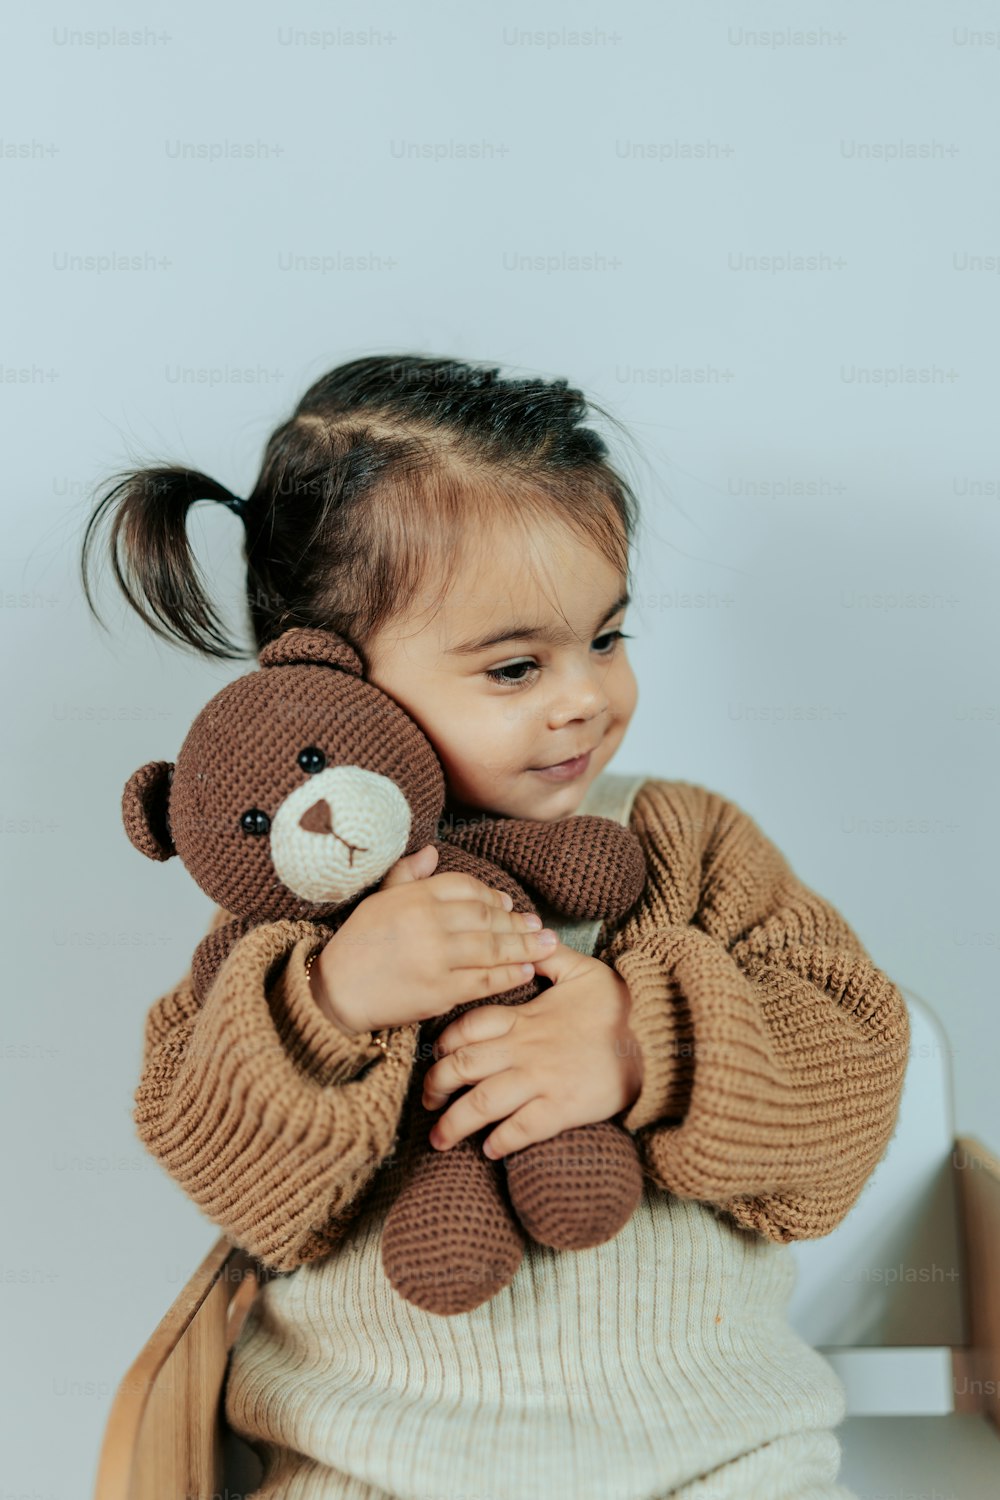 a little girl holding a teddy bear in her arms